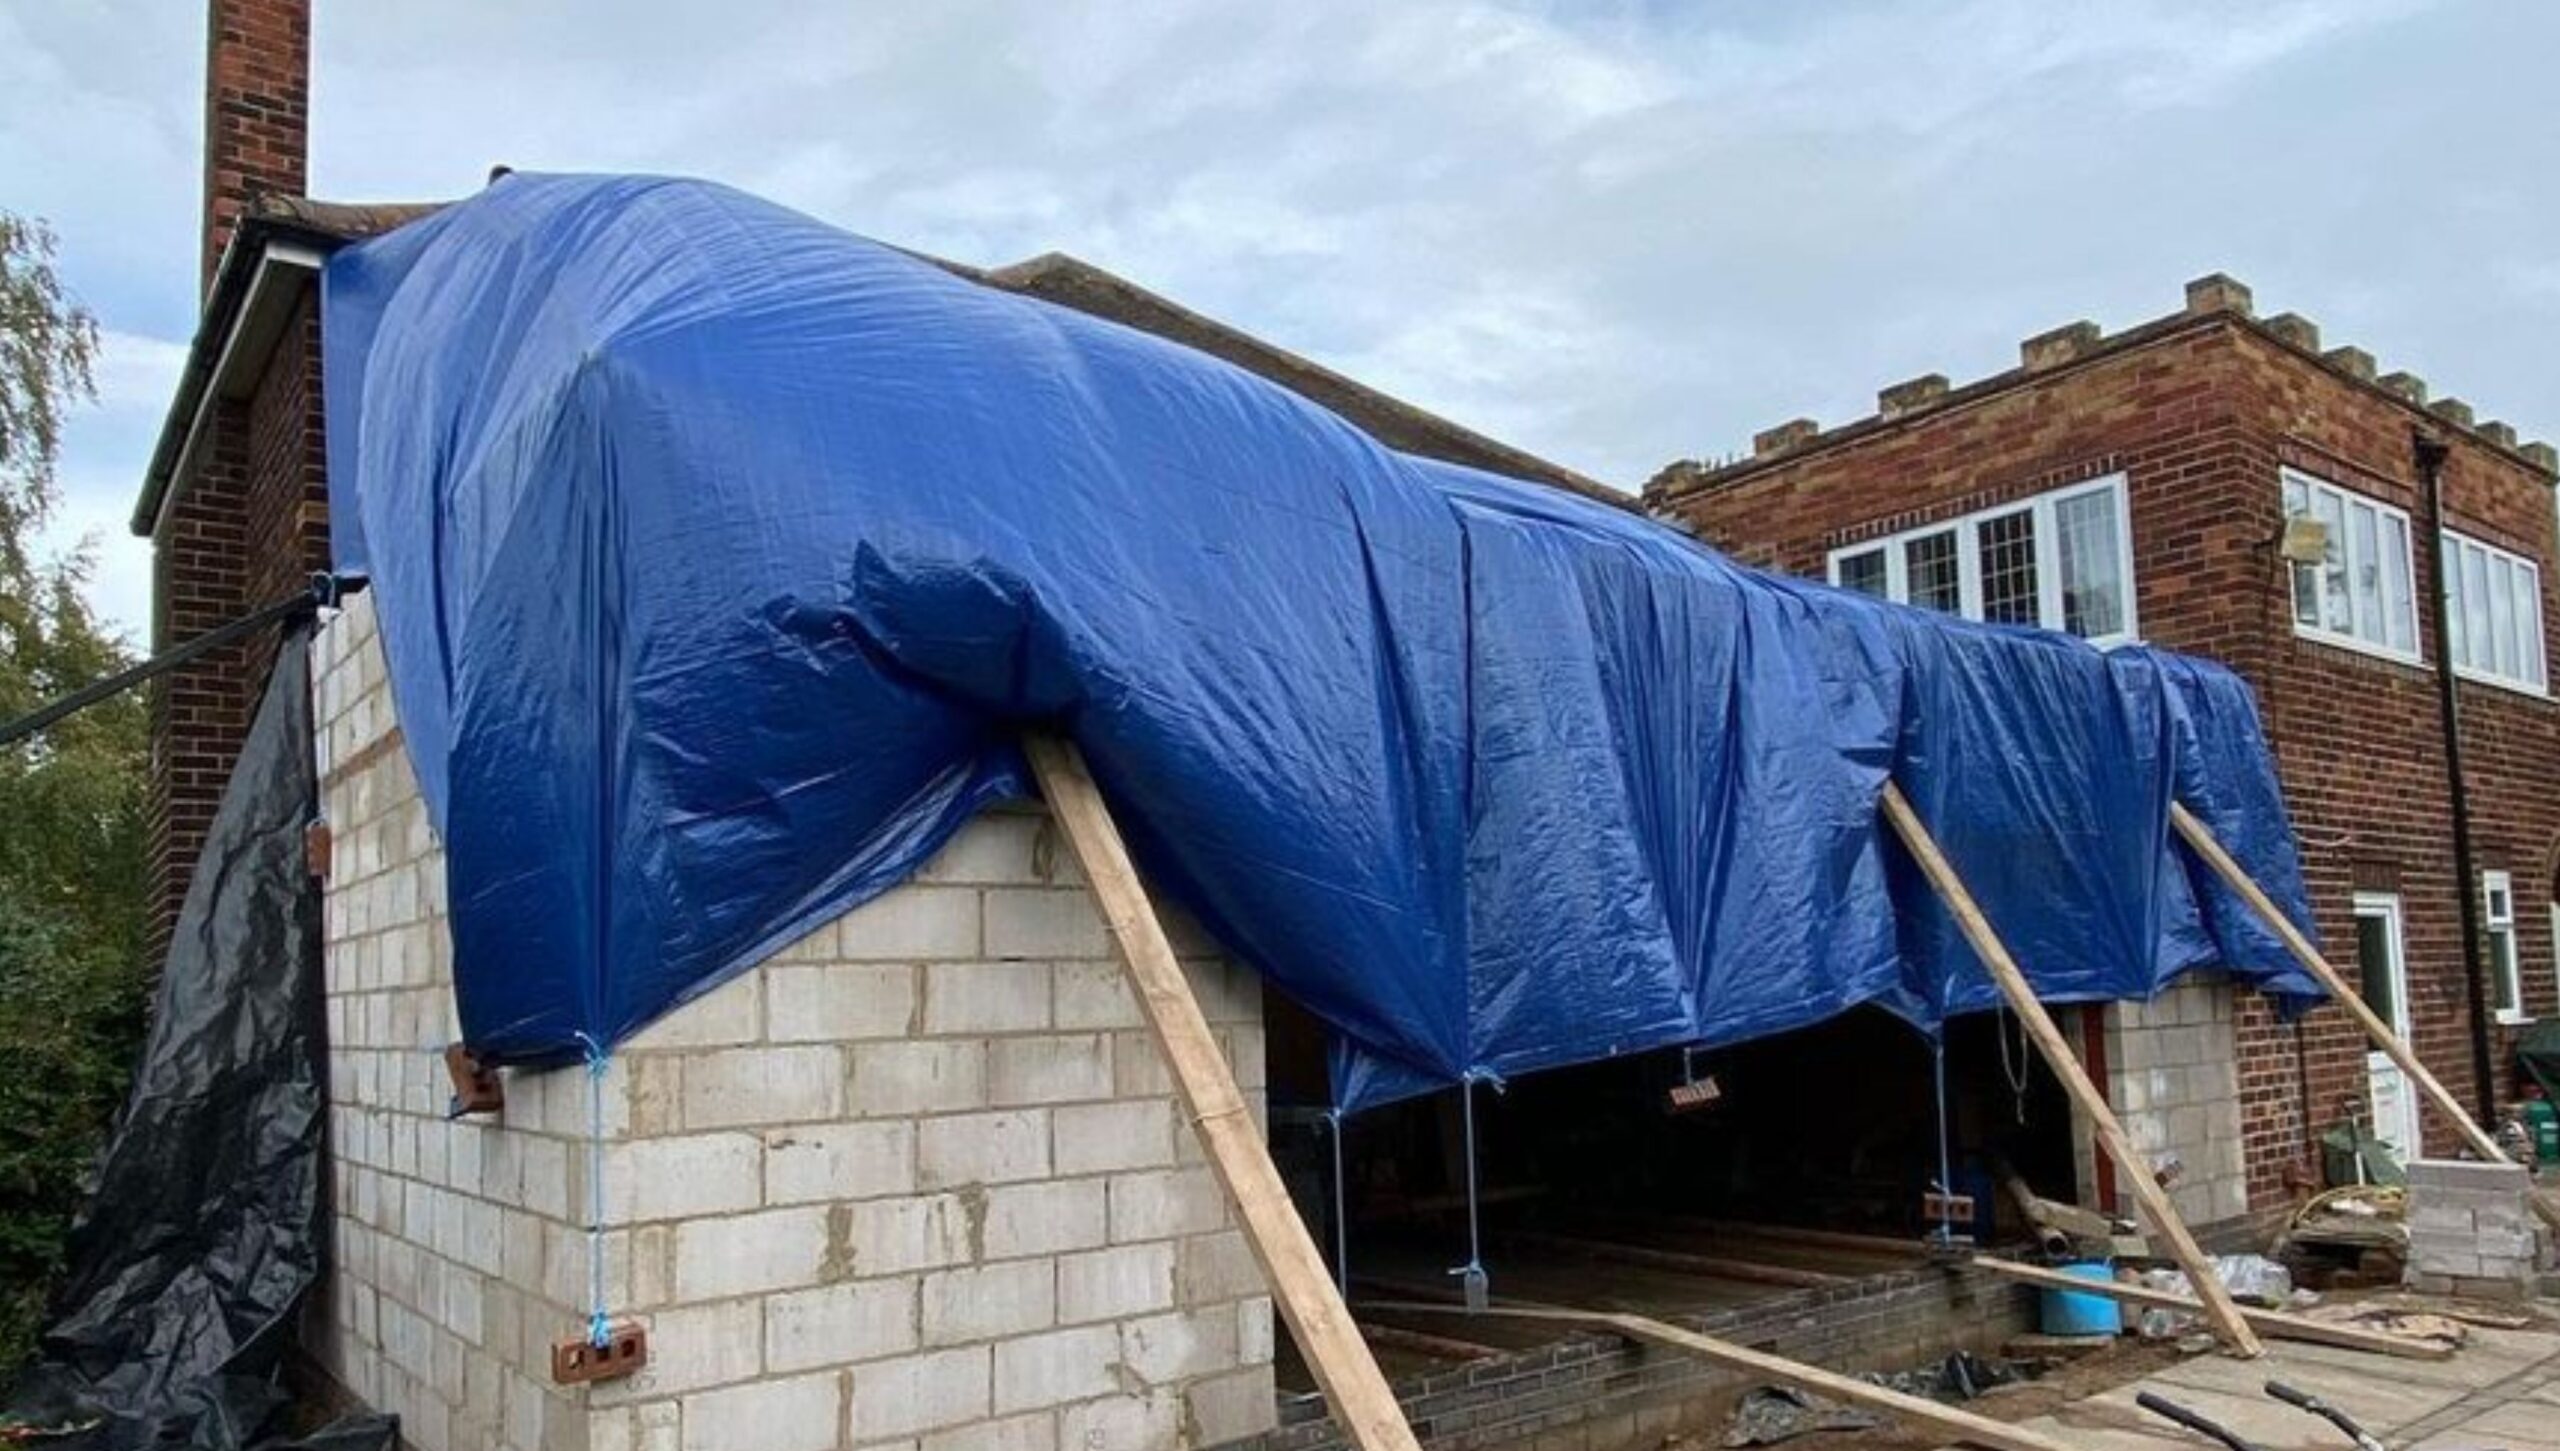 How long will a tarp last outside?